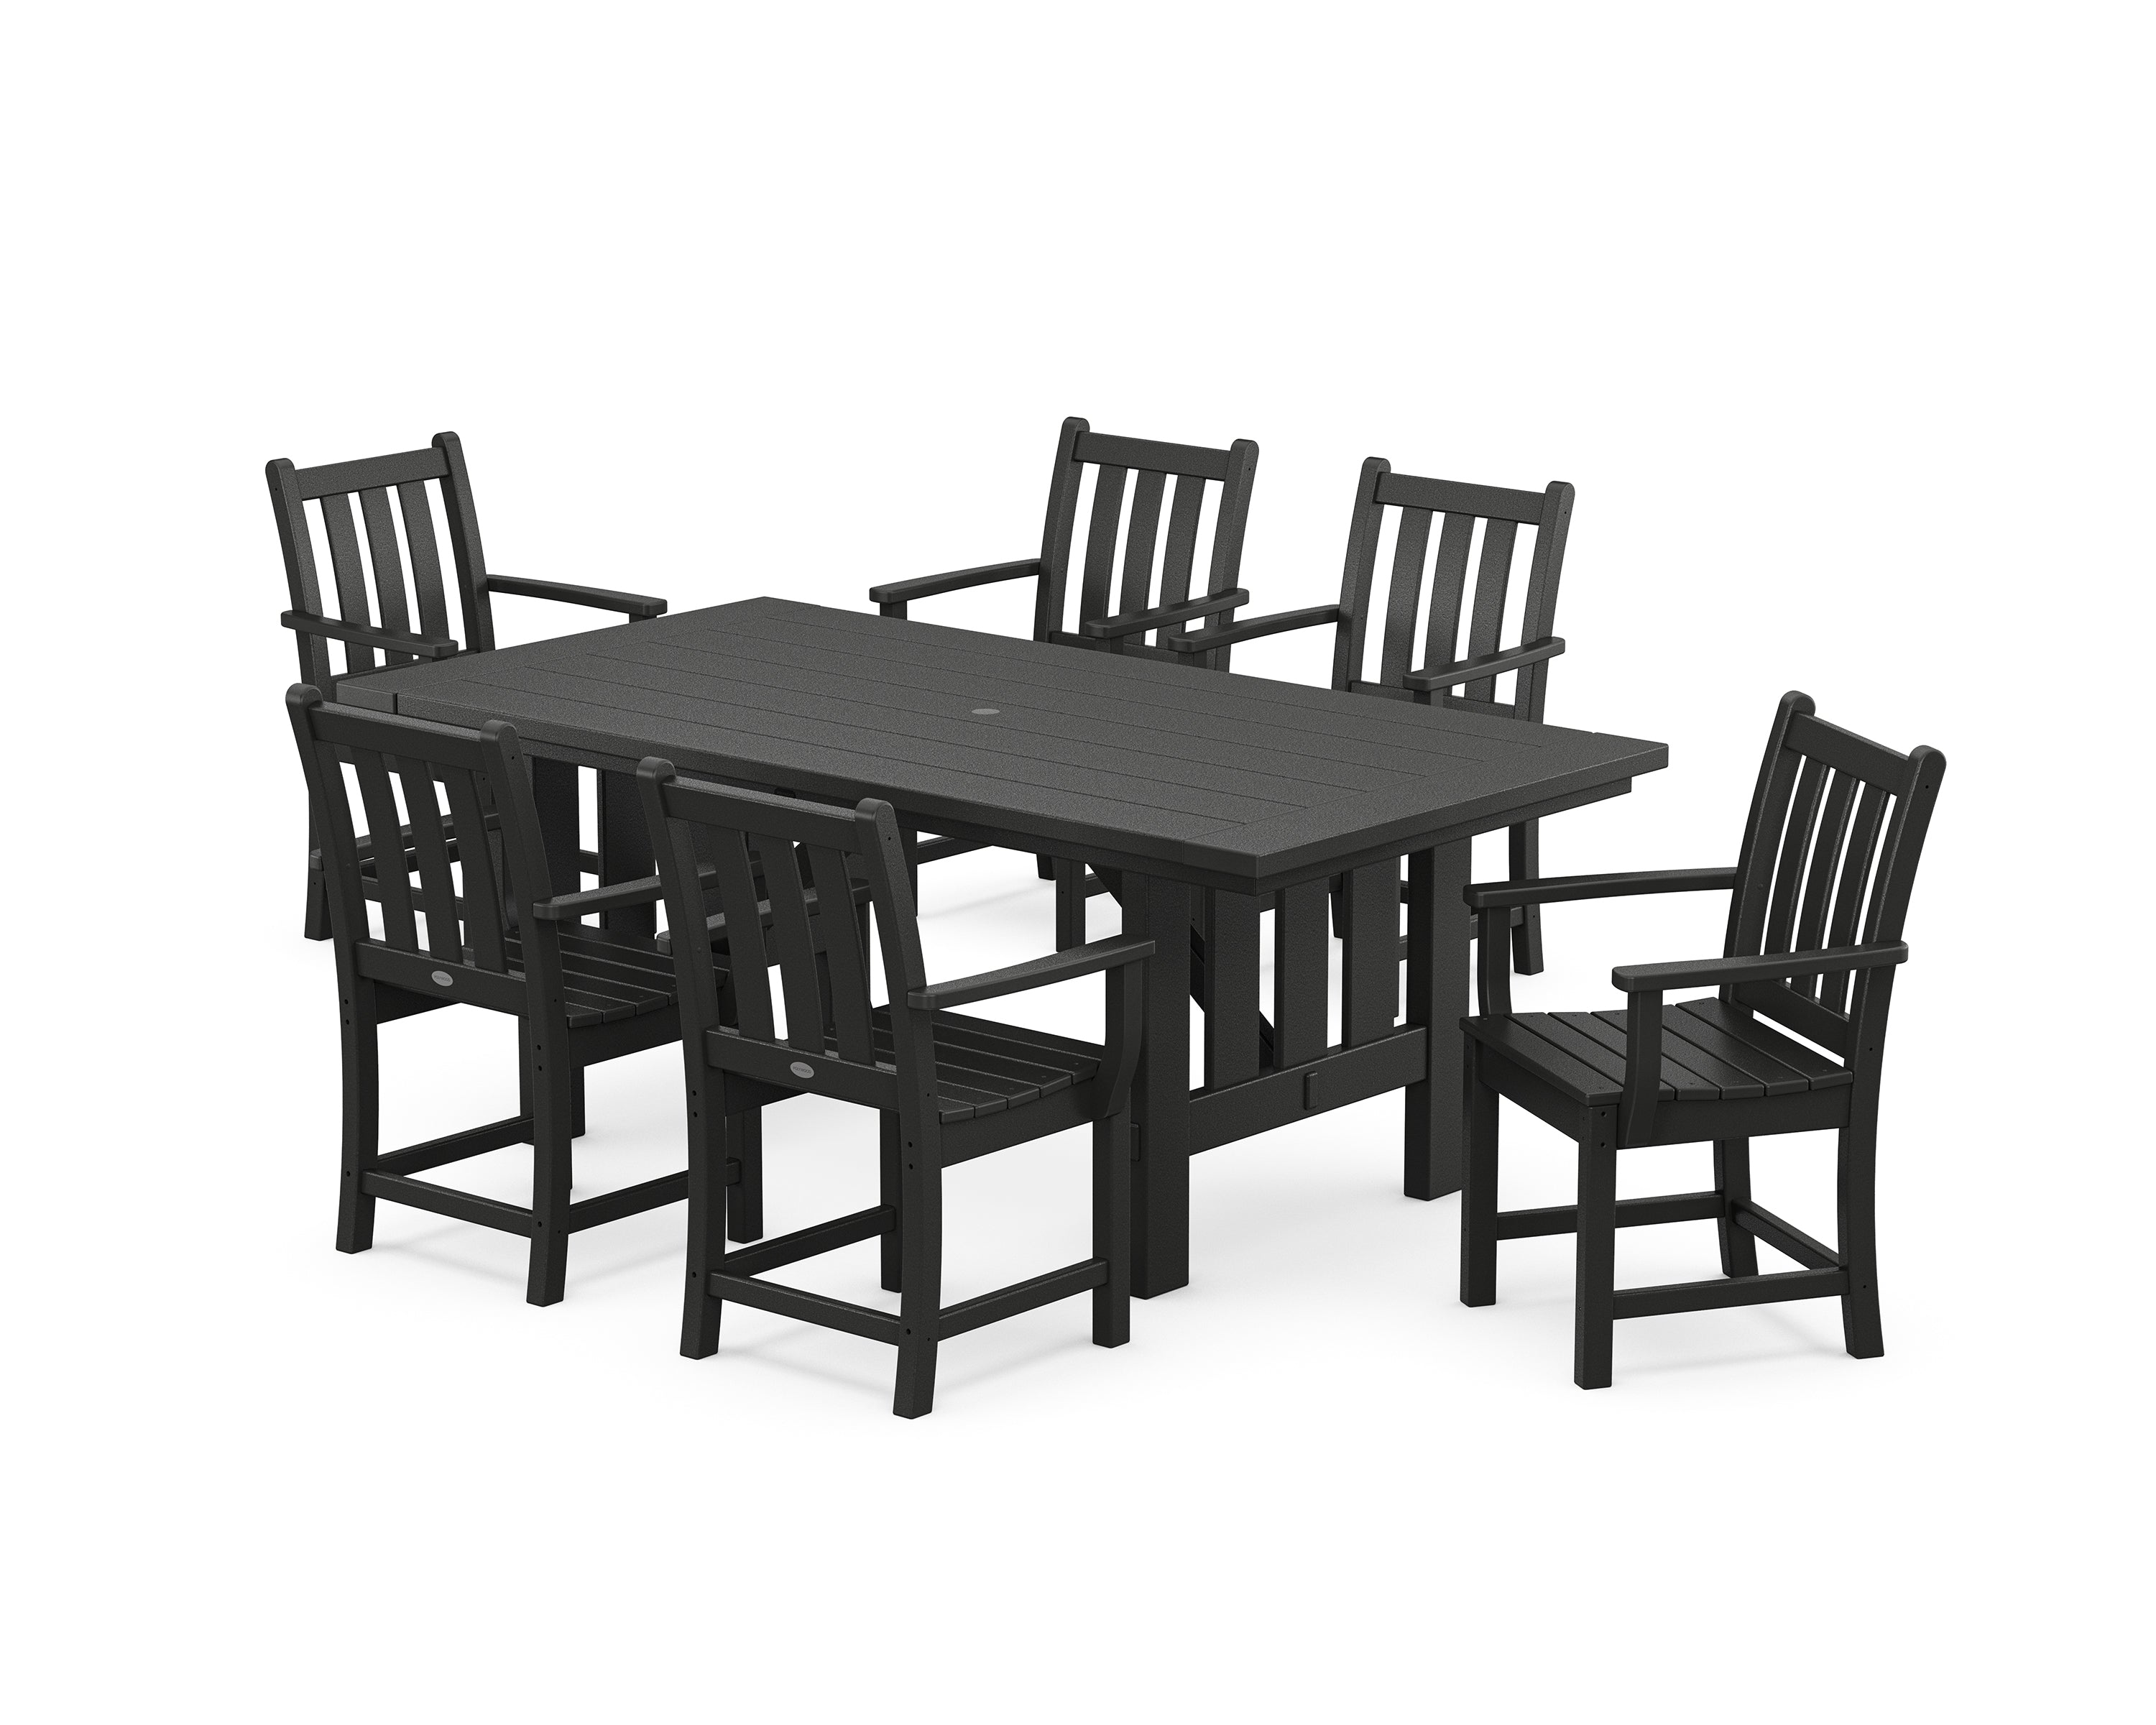 POLYWOOD® Traditional Garden Arm Chair 7-Piece Mission Dining Set in Black